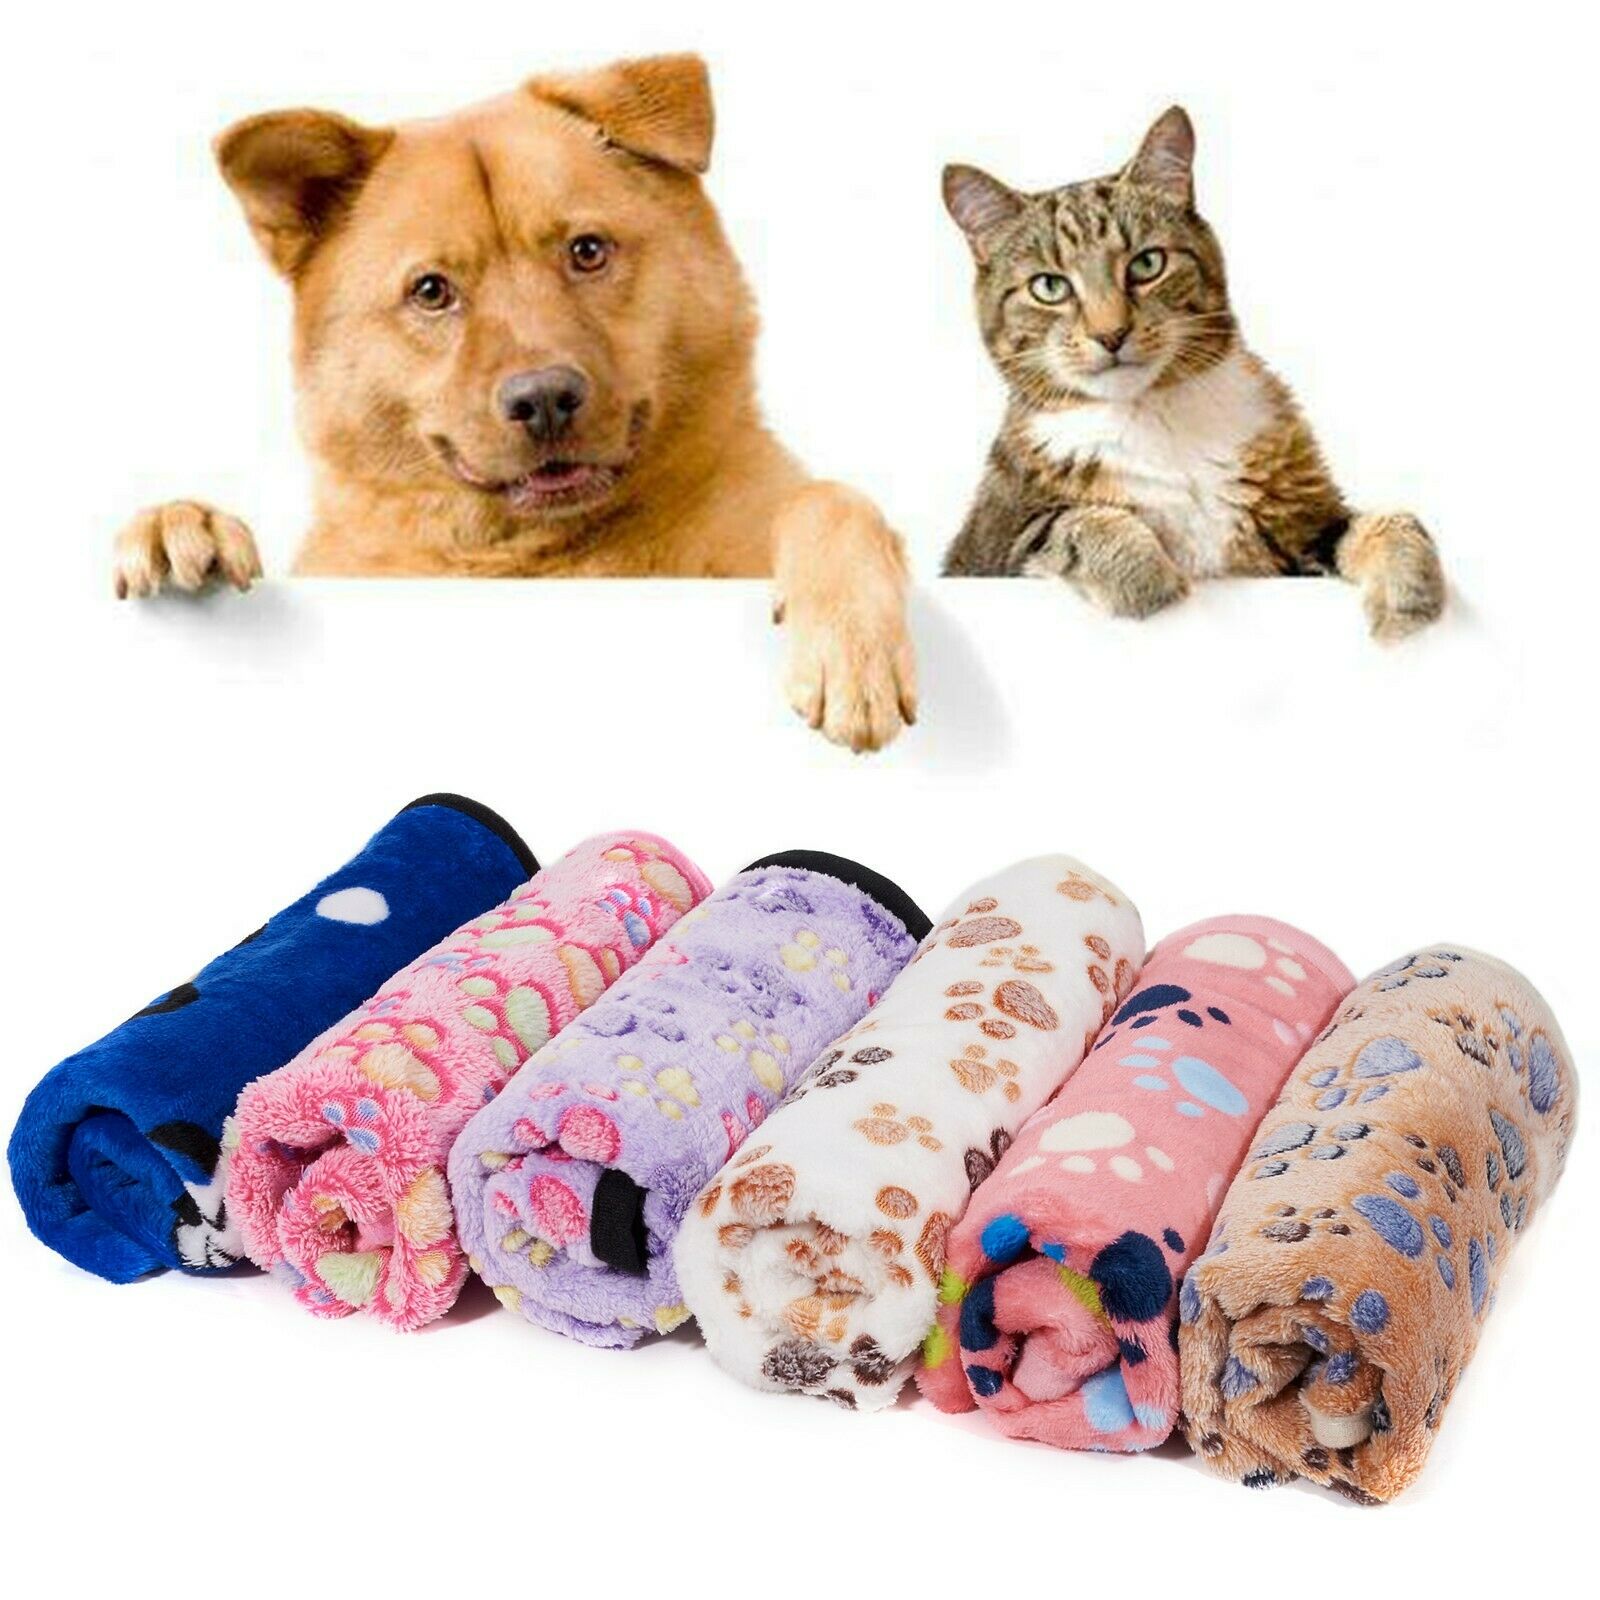 2 Packs Soft Pet Blanket For Dog Cat Warm Puppy Kitten Cushion Bed Mat Pad Cover